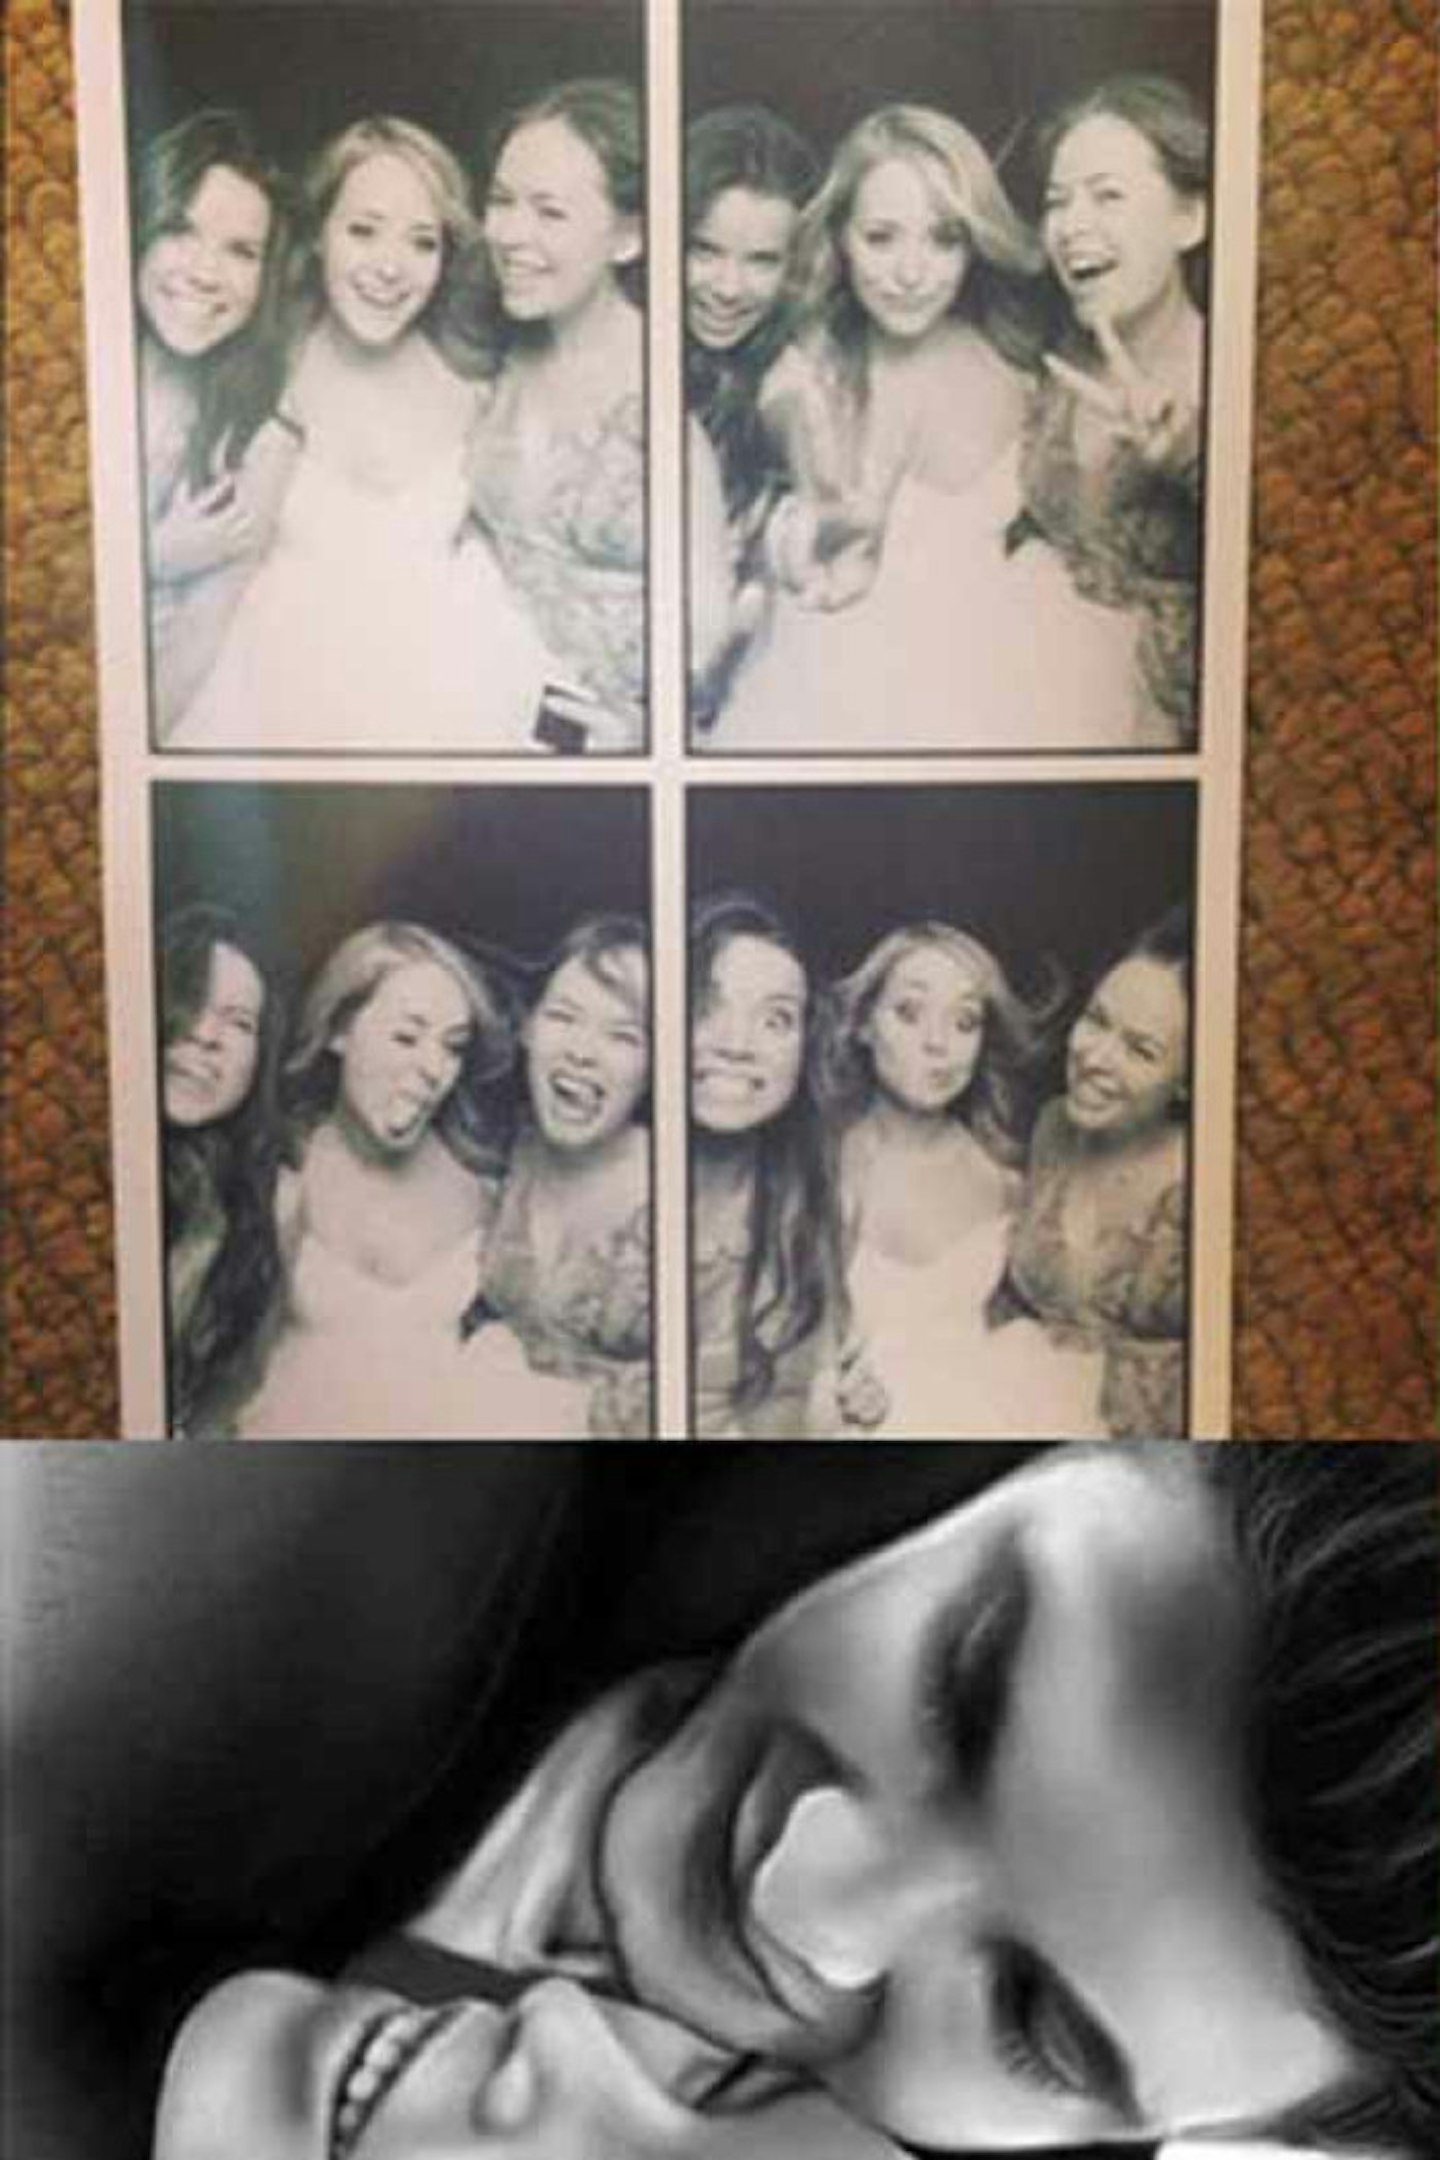 GALLERY>> Tanya Burr's diary in pictures